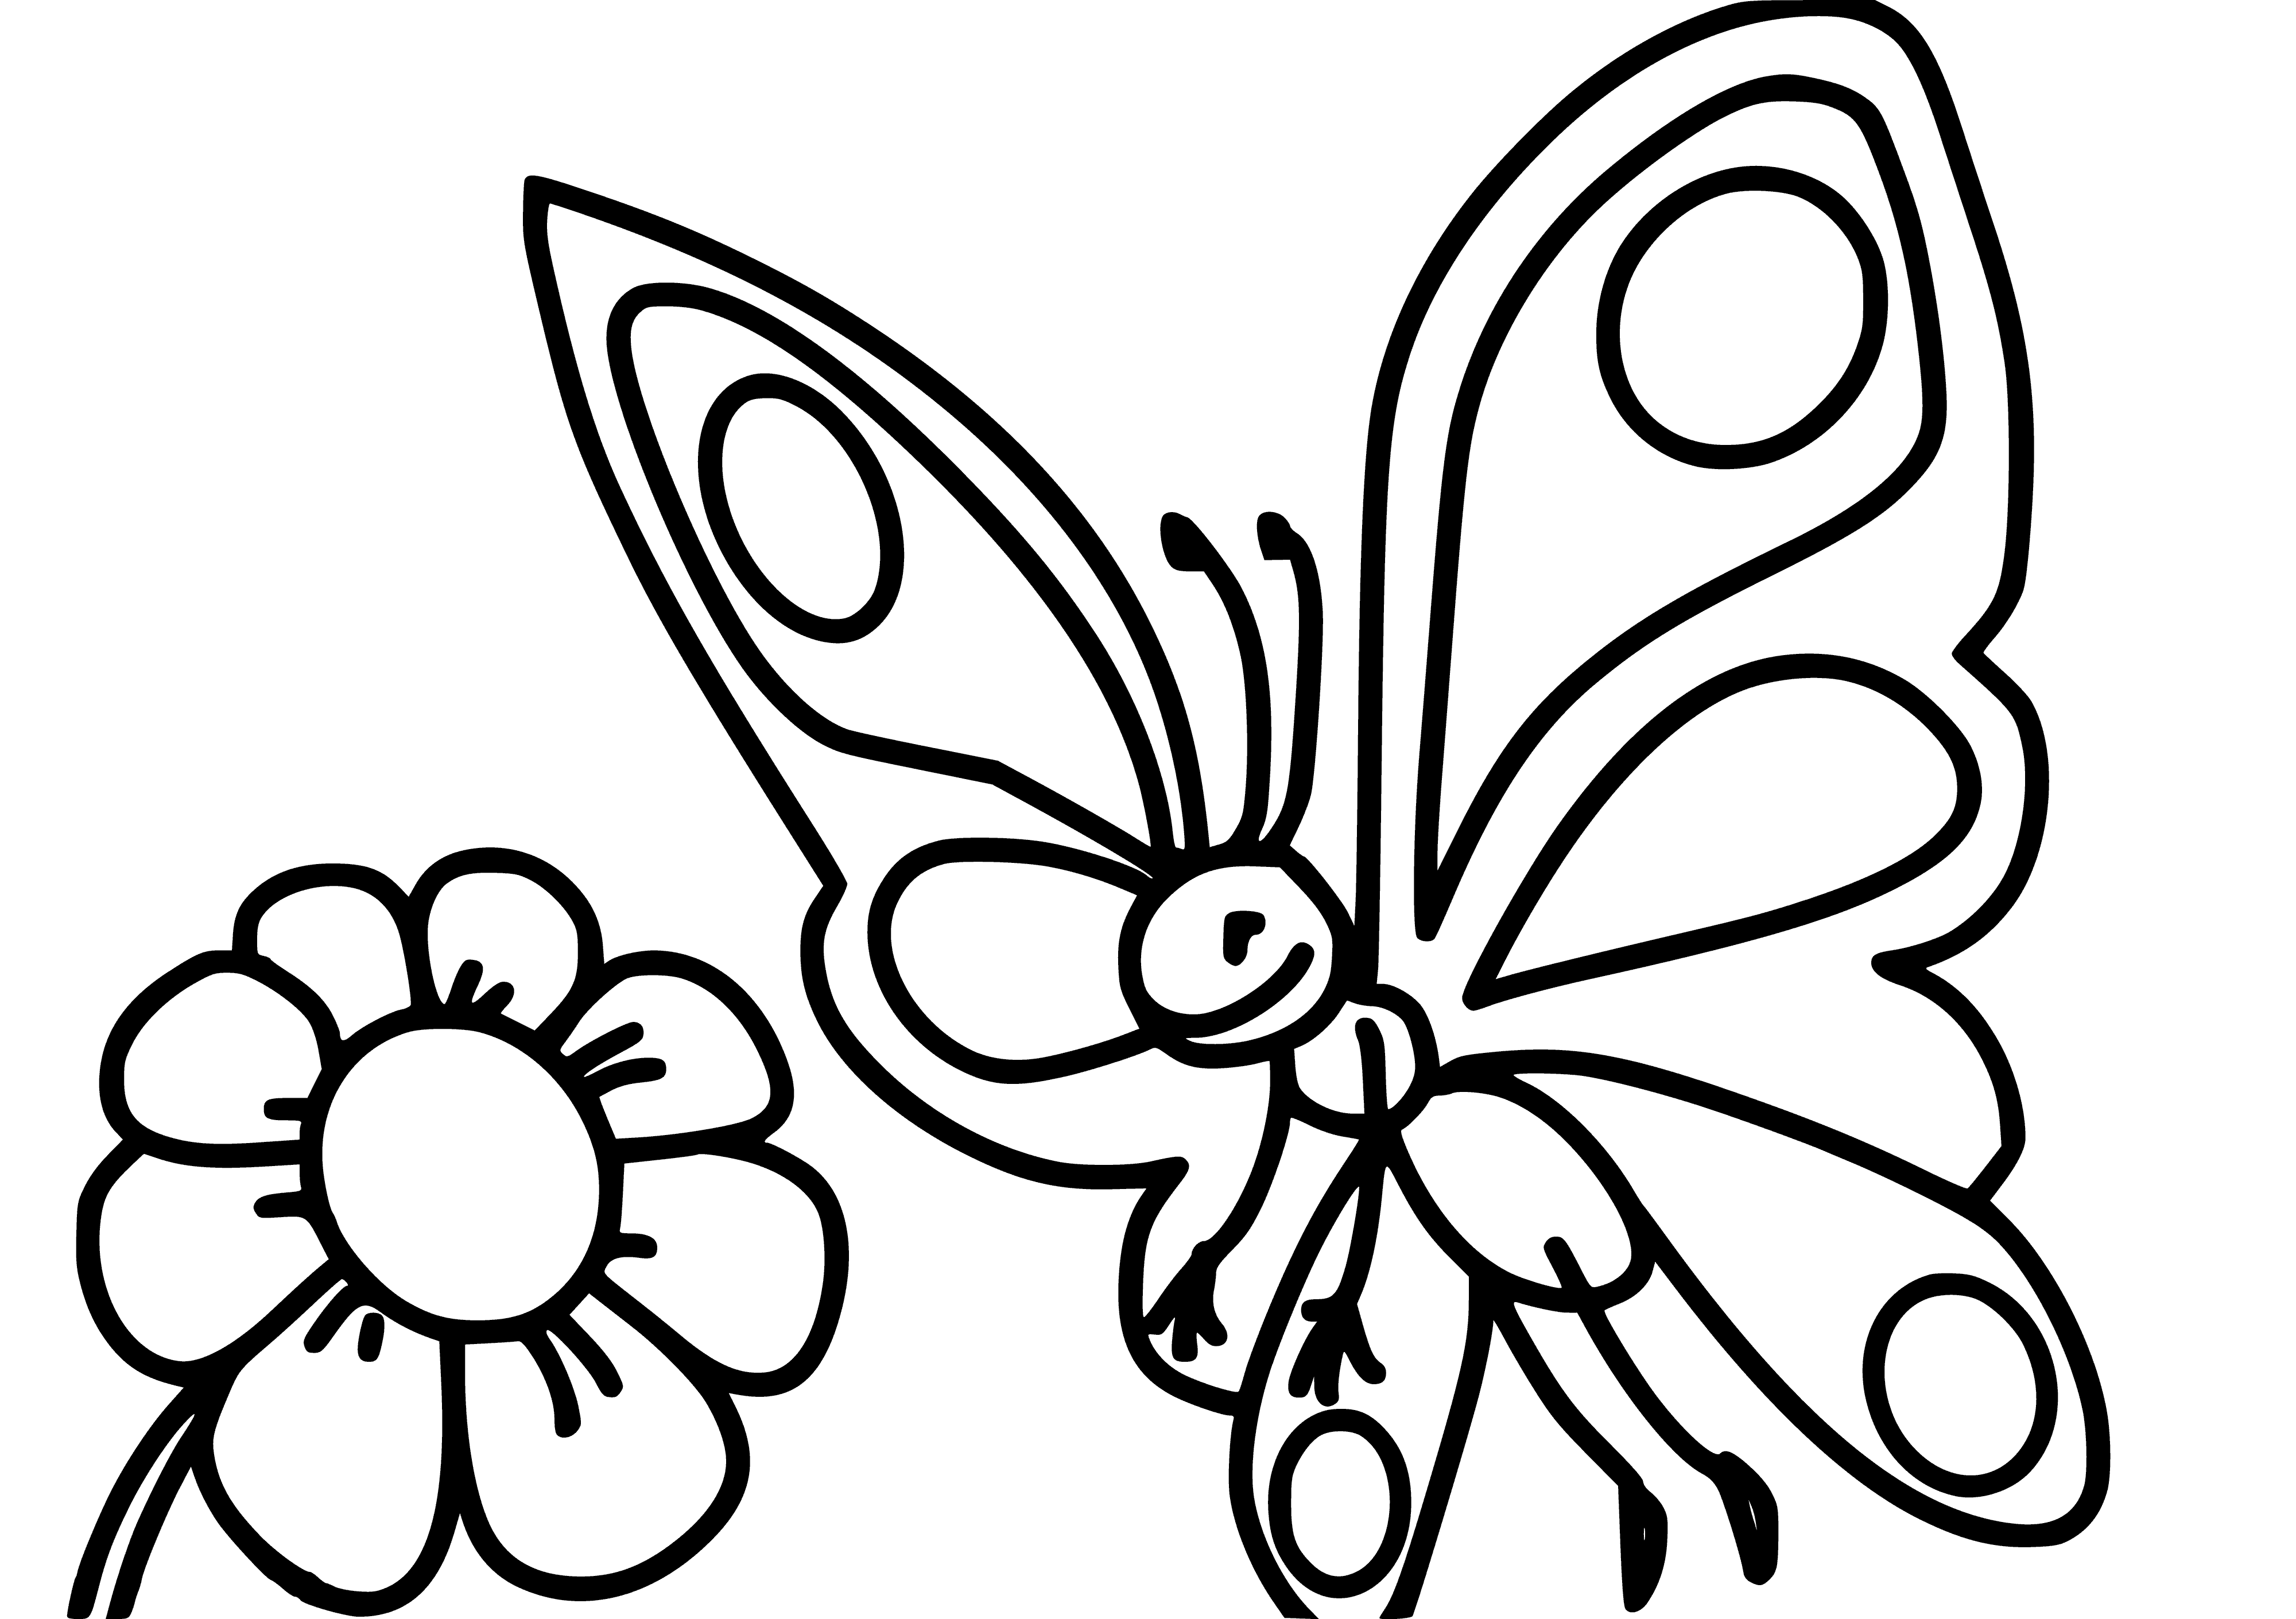 coloring page: Butterfly of light/dark blue and white atop yellow/orange flower, curled petals and green center; wings spread and body tilted.